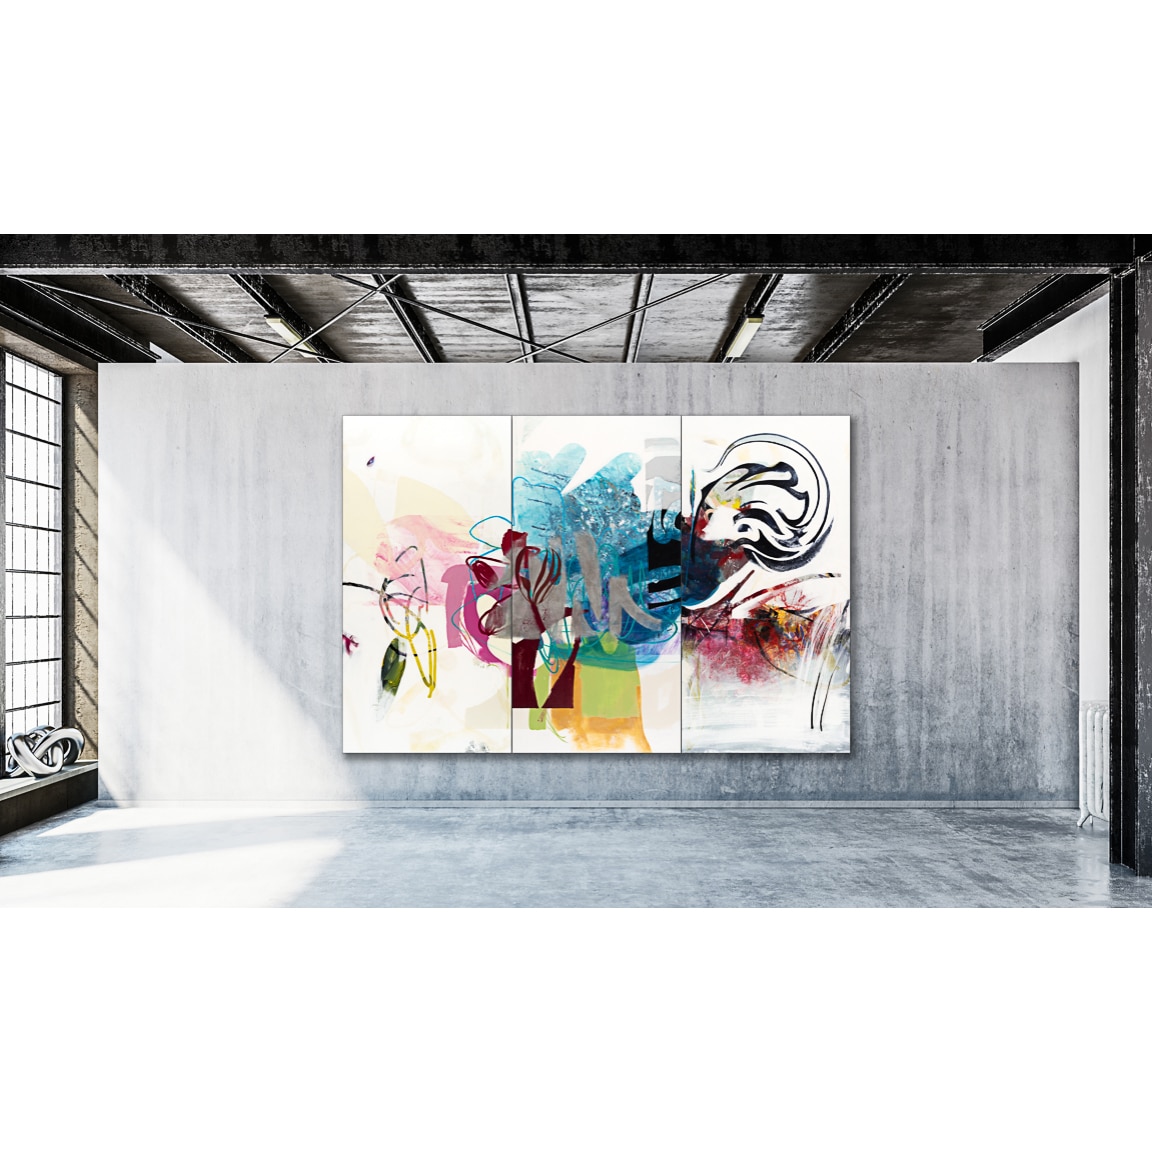 Large Contemporary Abstract Painting Colorful Urban Industrial Graffiti Art Loft